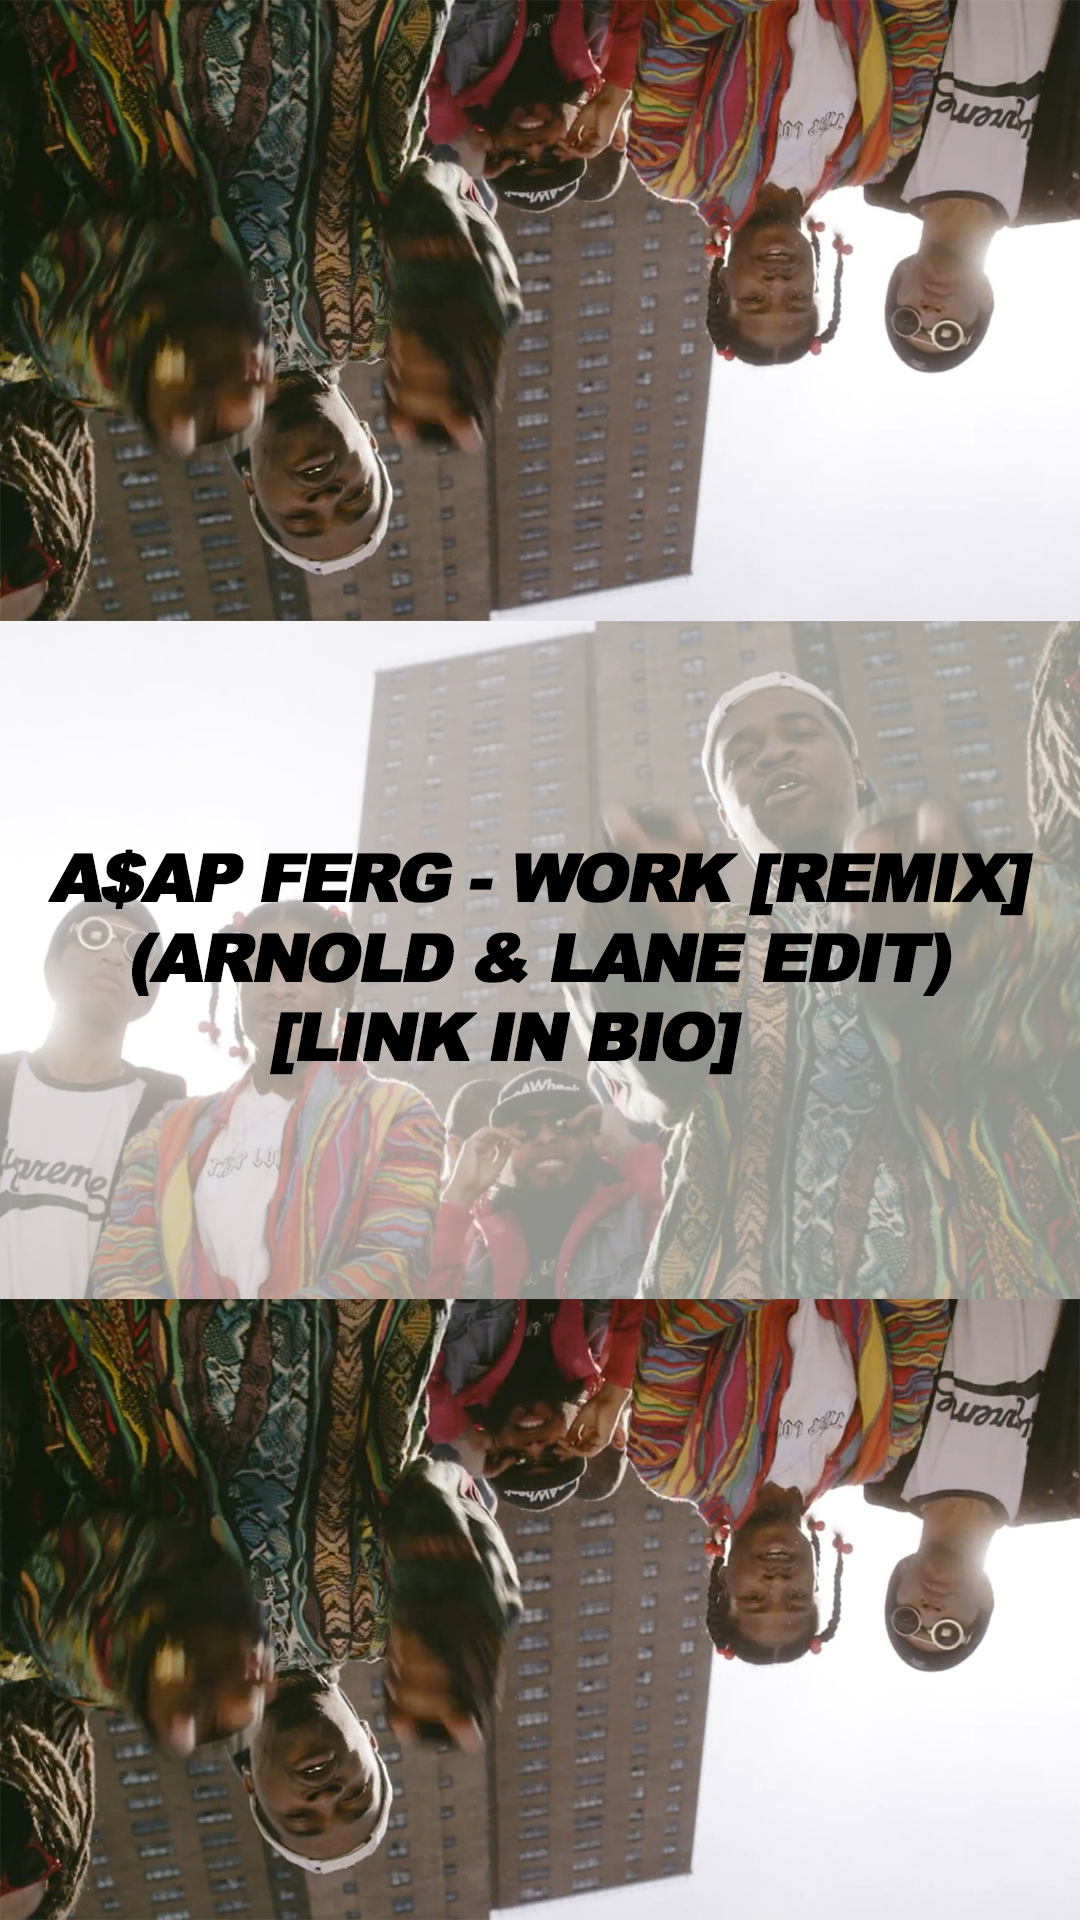 andy glanz recommends download asap ferg work pic